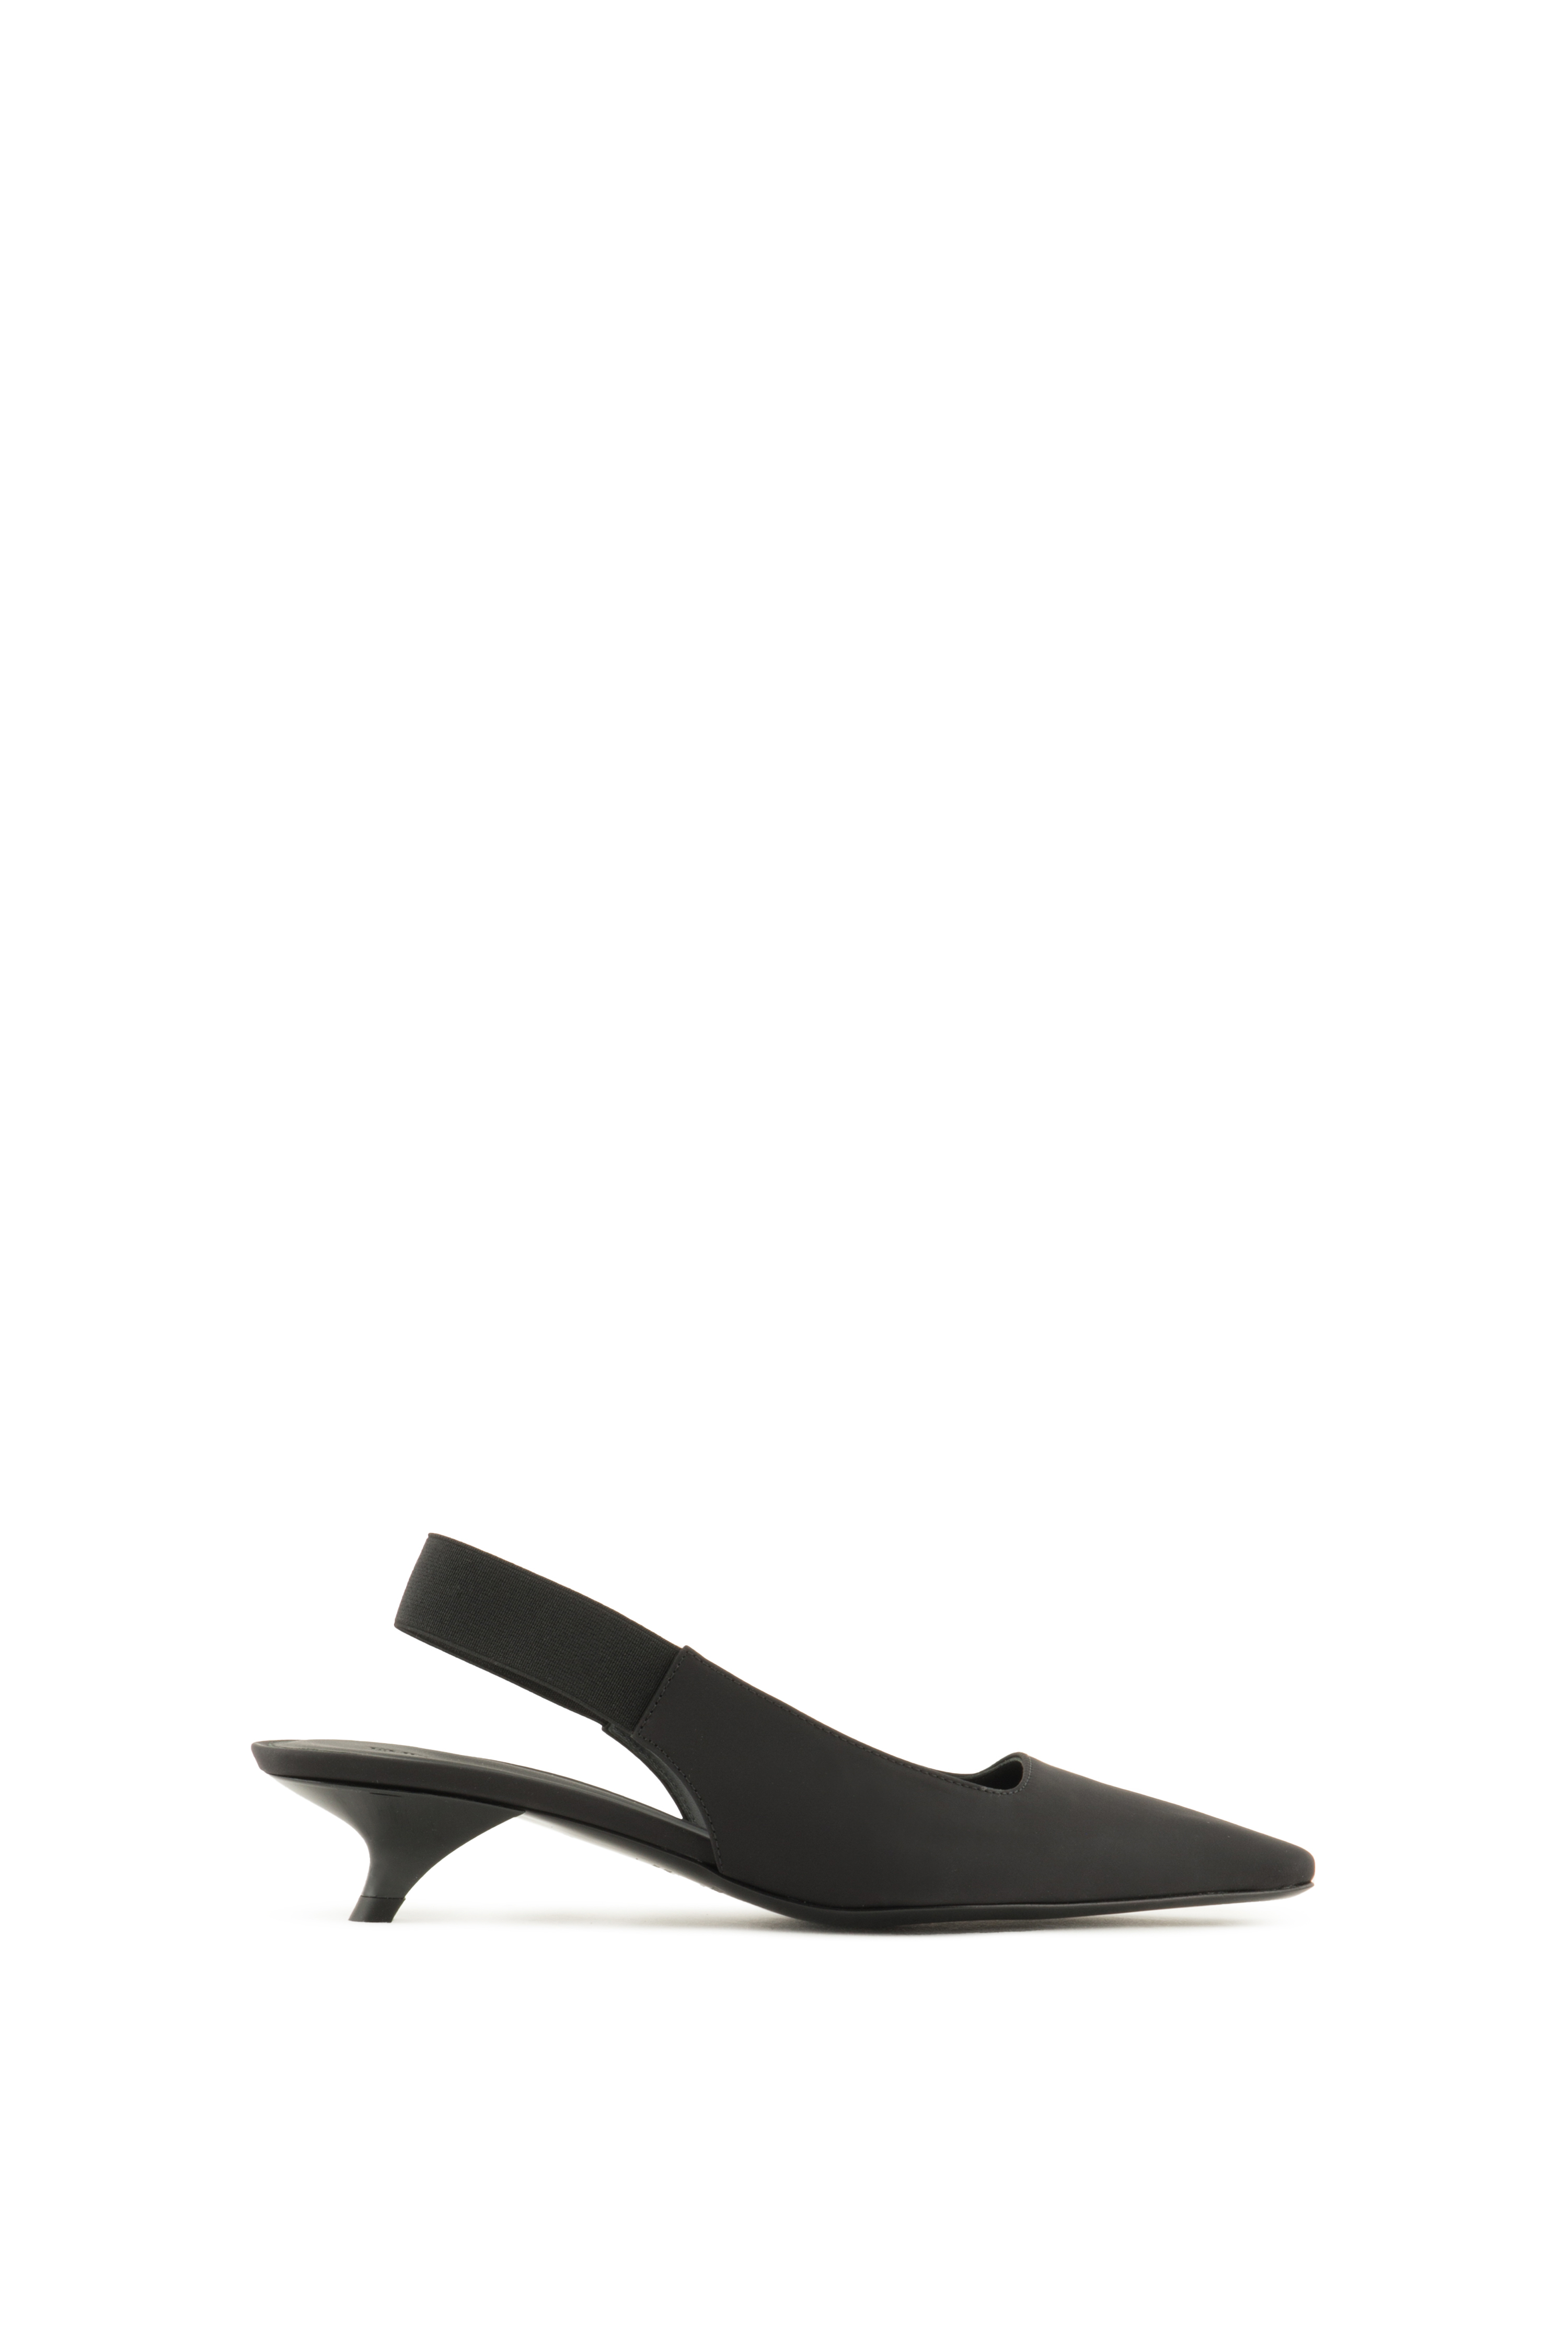 Emporio Armani Nylon slingback court shoes with square toes